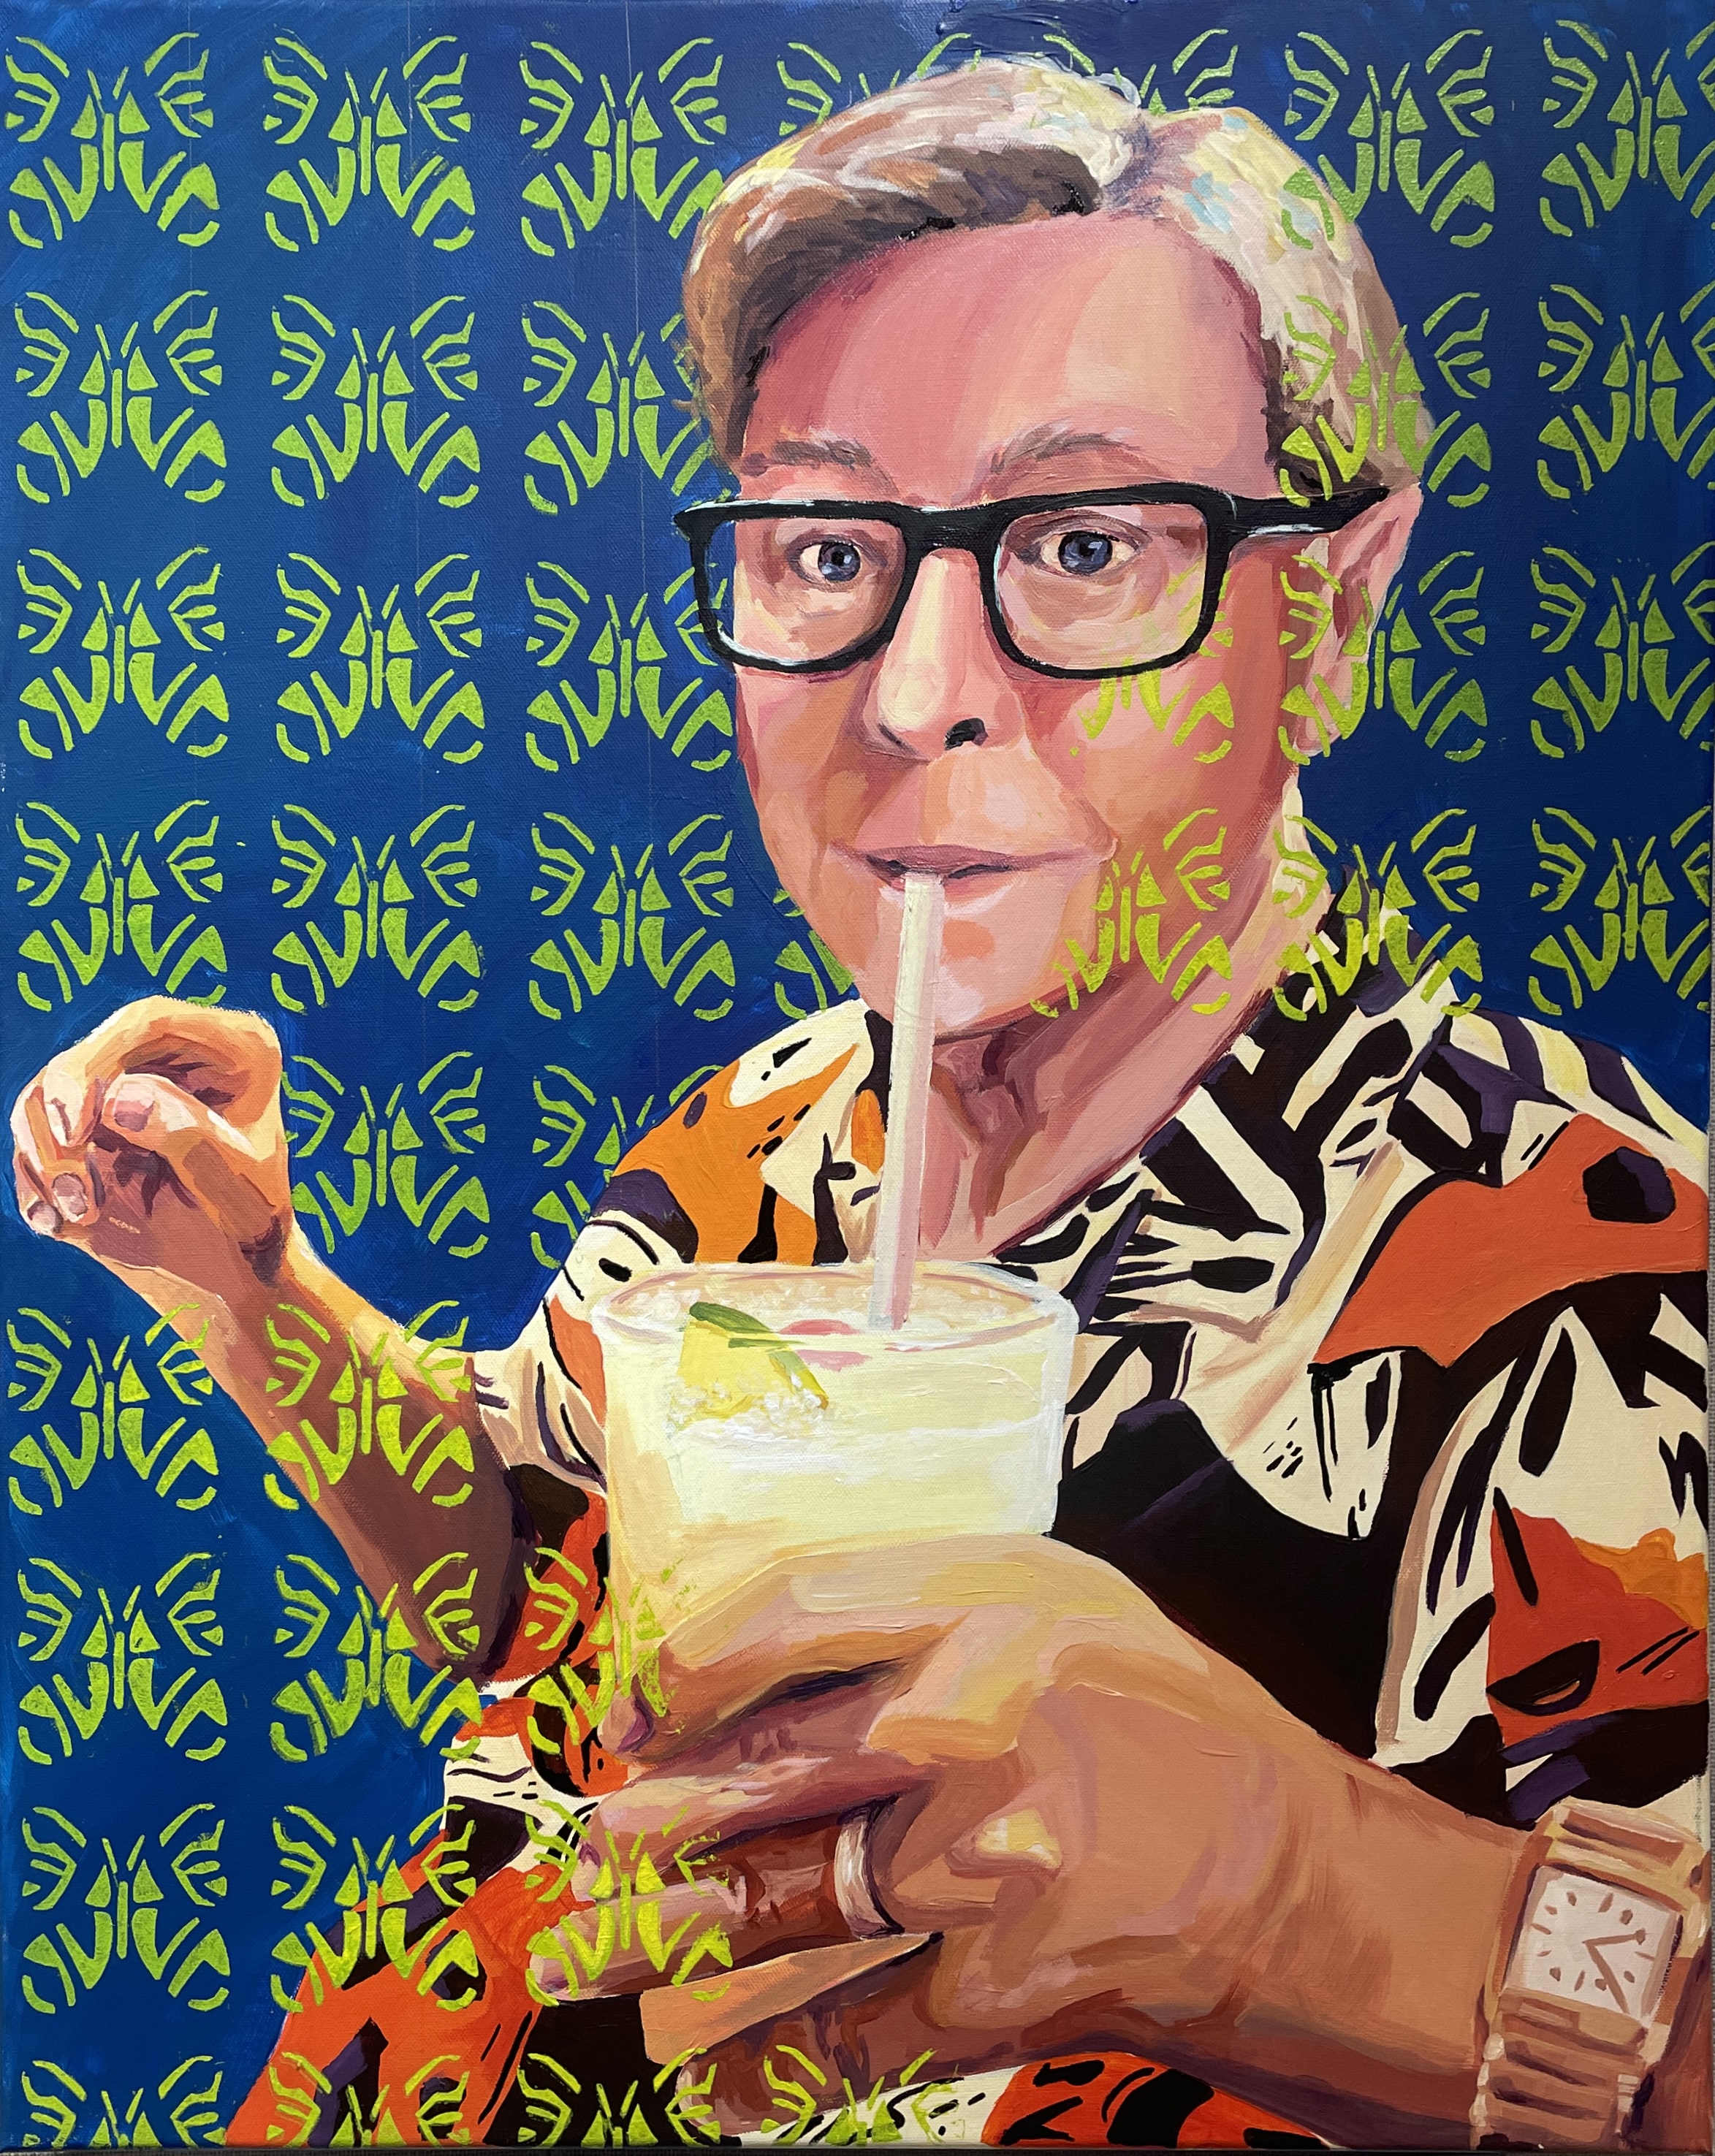 Painting of a person drinking lemonade